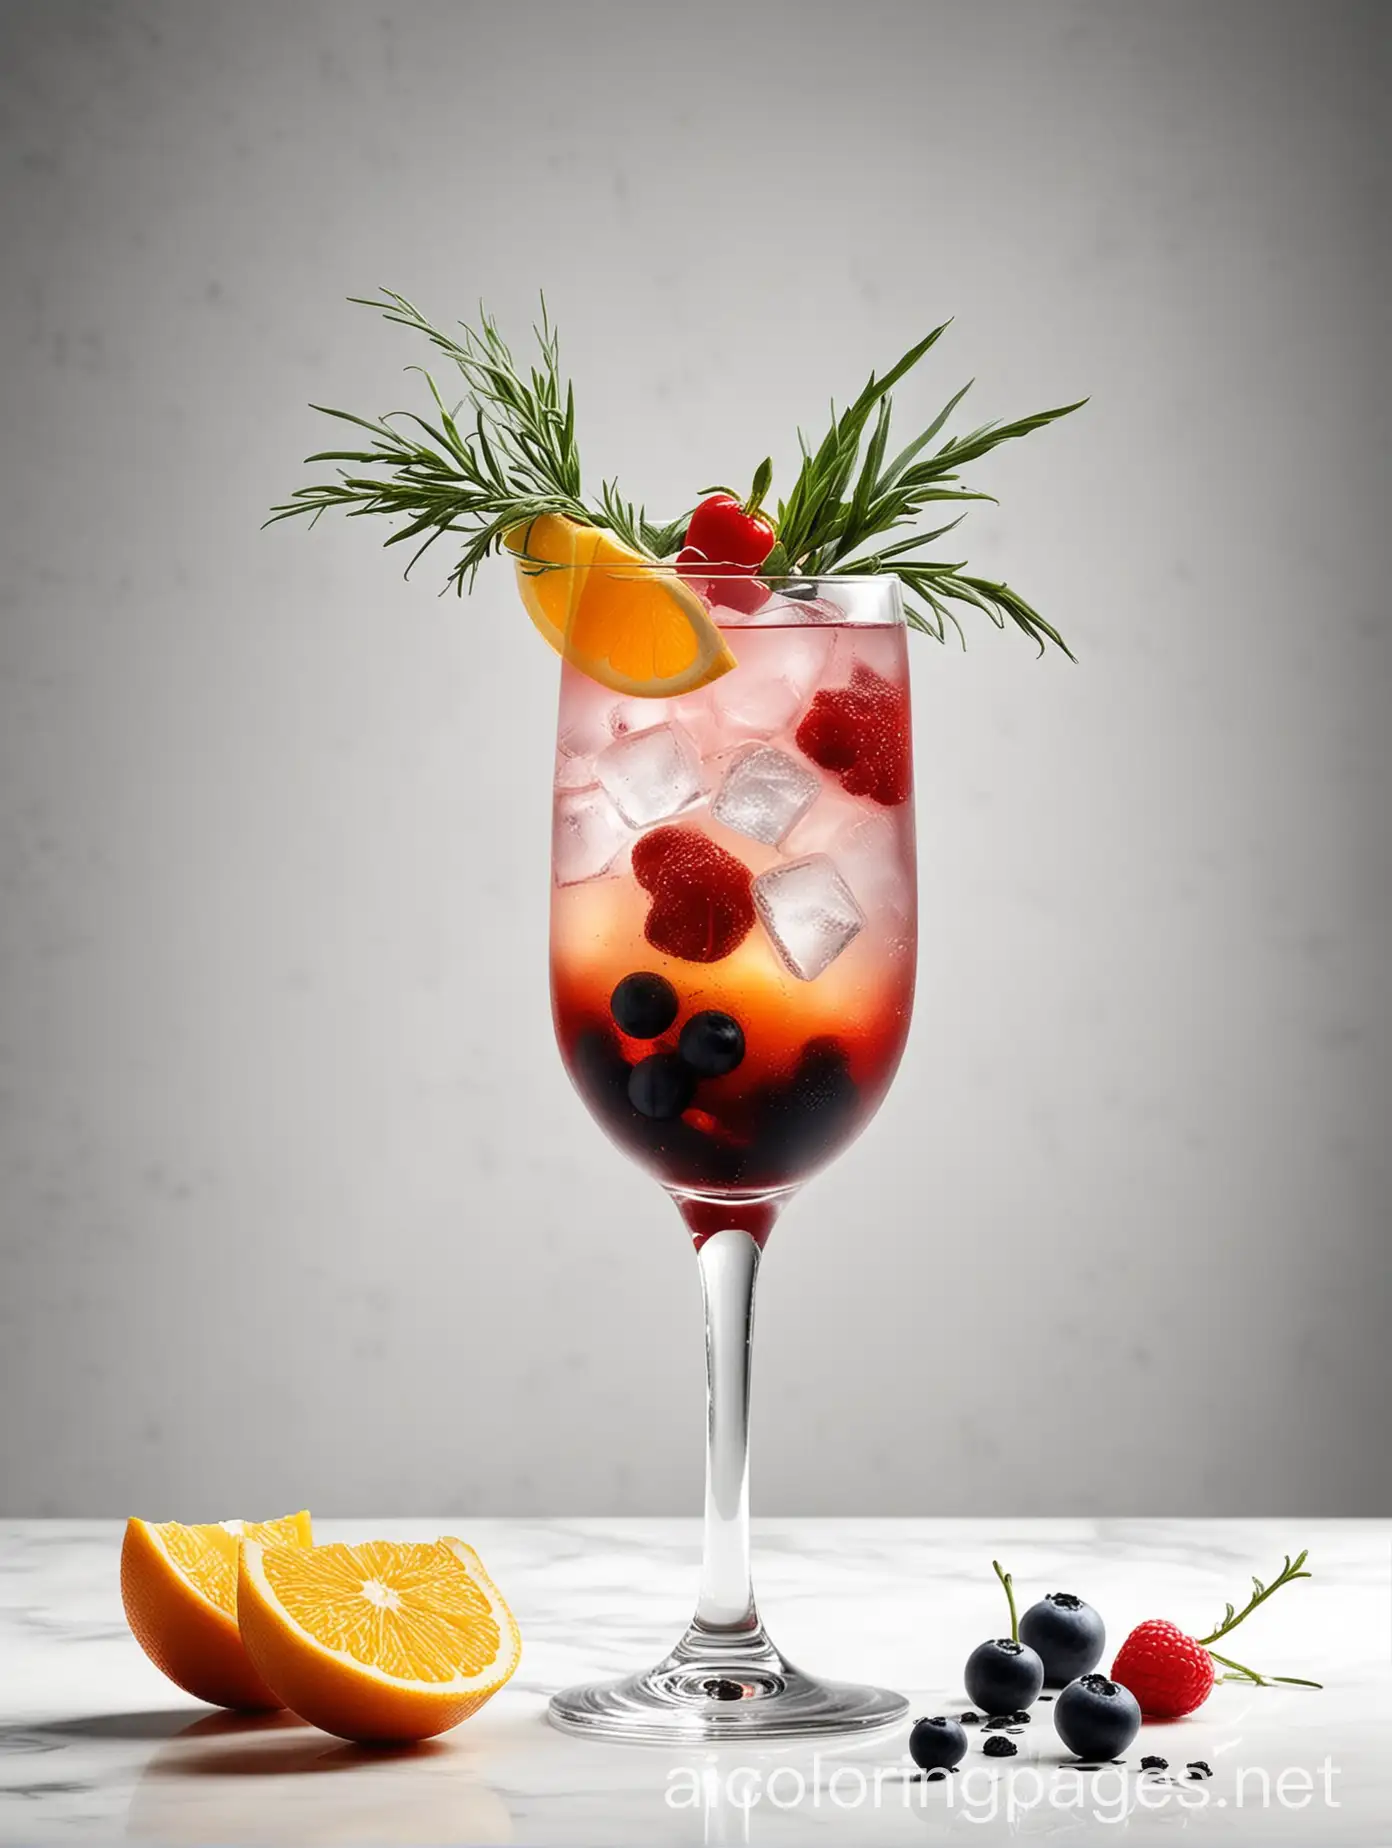 Create a visually stunning image that captures the artistry of mixology. Display a mesmerizing cocktail presentation with vibrant colors, meticulously crafted garnishes, and an ambiance that exudes sophistication. This image should inspire viewers to appreciate the creativity and craftsmanship behind mixology, Coloring Page, black and white, line art, white background, Simplicity, Ample White Space. The background of the coloring page is plain white to make it easy for young children to color within the lines. The outlines of all the subjects are easy to distinguish, making it simple for kids to color without too much difficulty